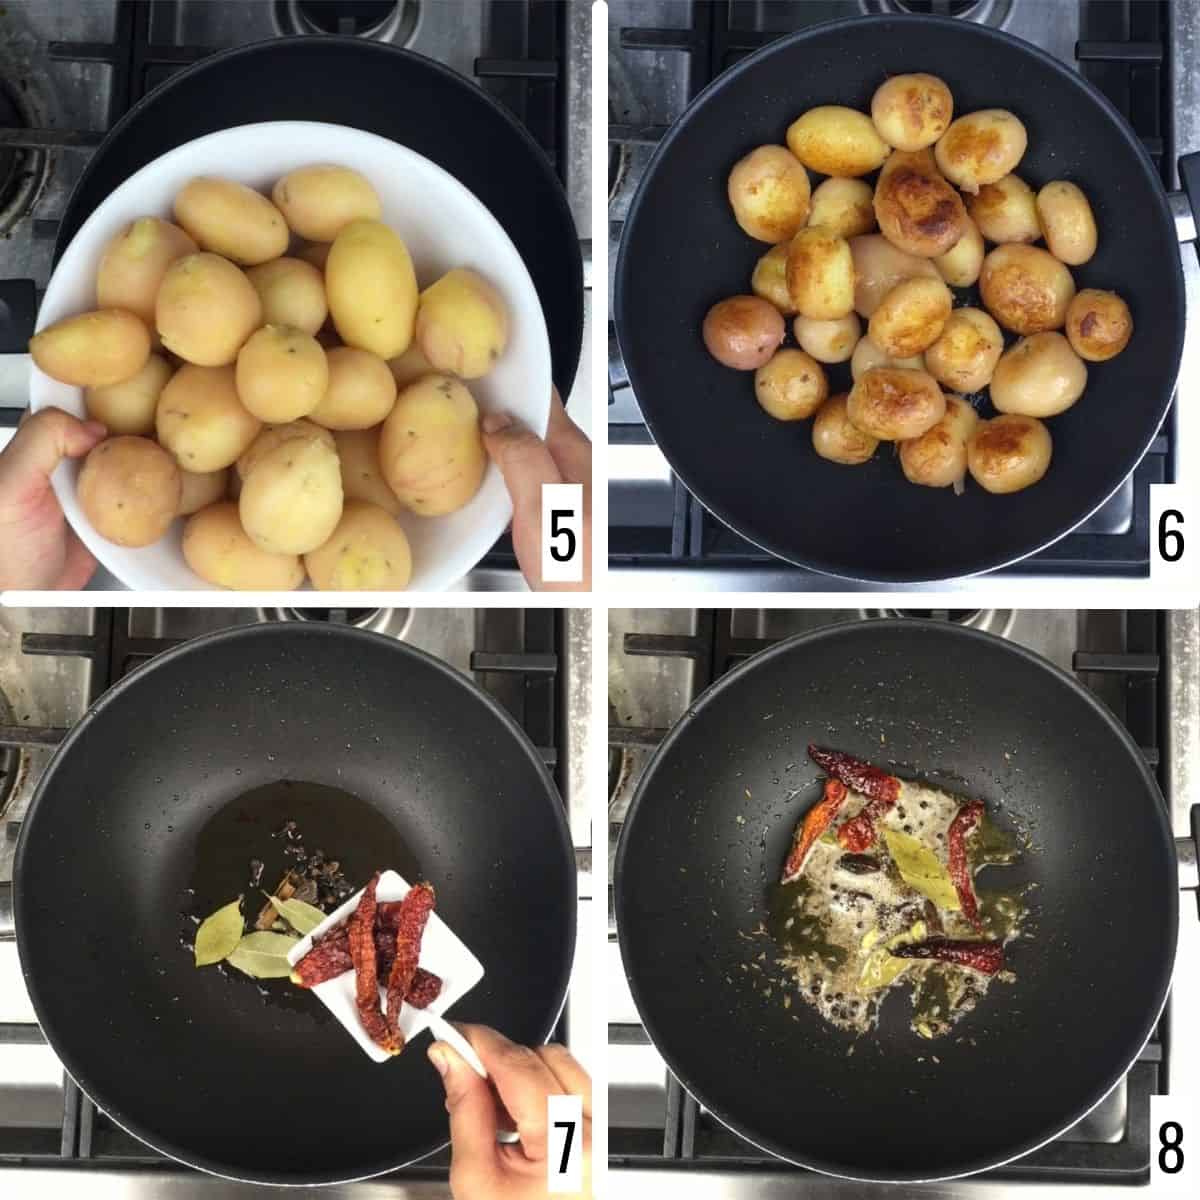 A 4-step collage showing the sauteing of potatoes and tempering whole spices.